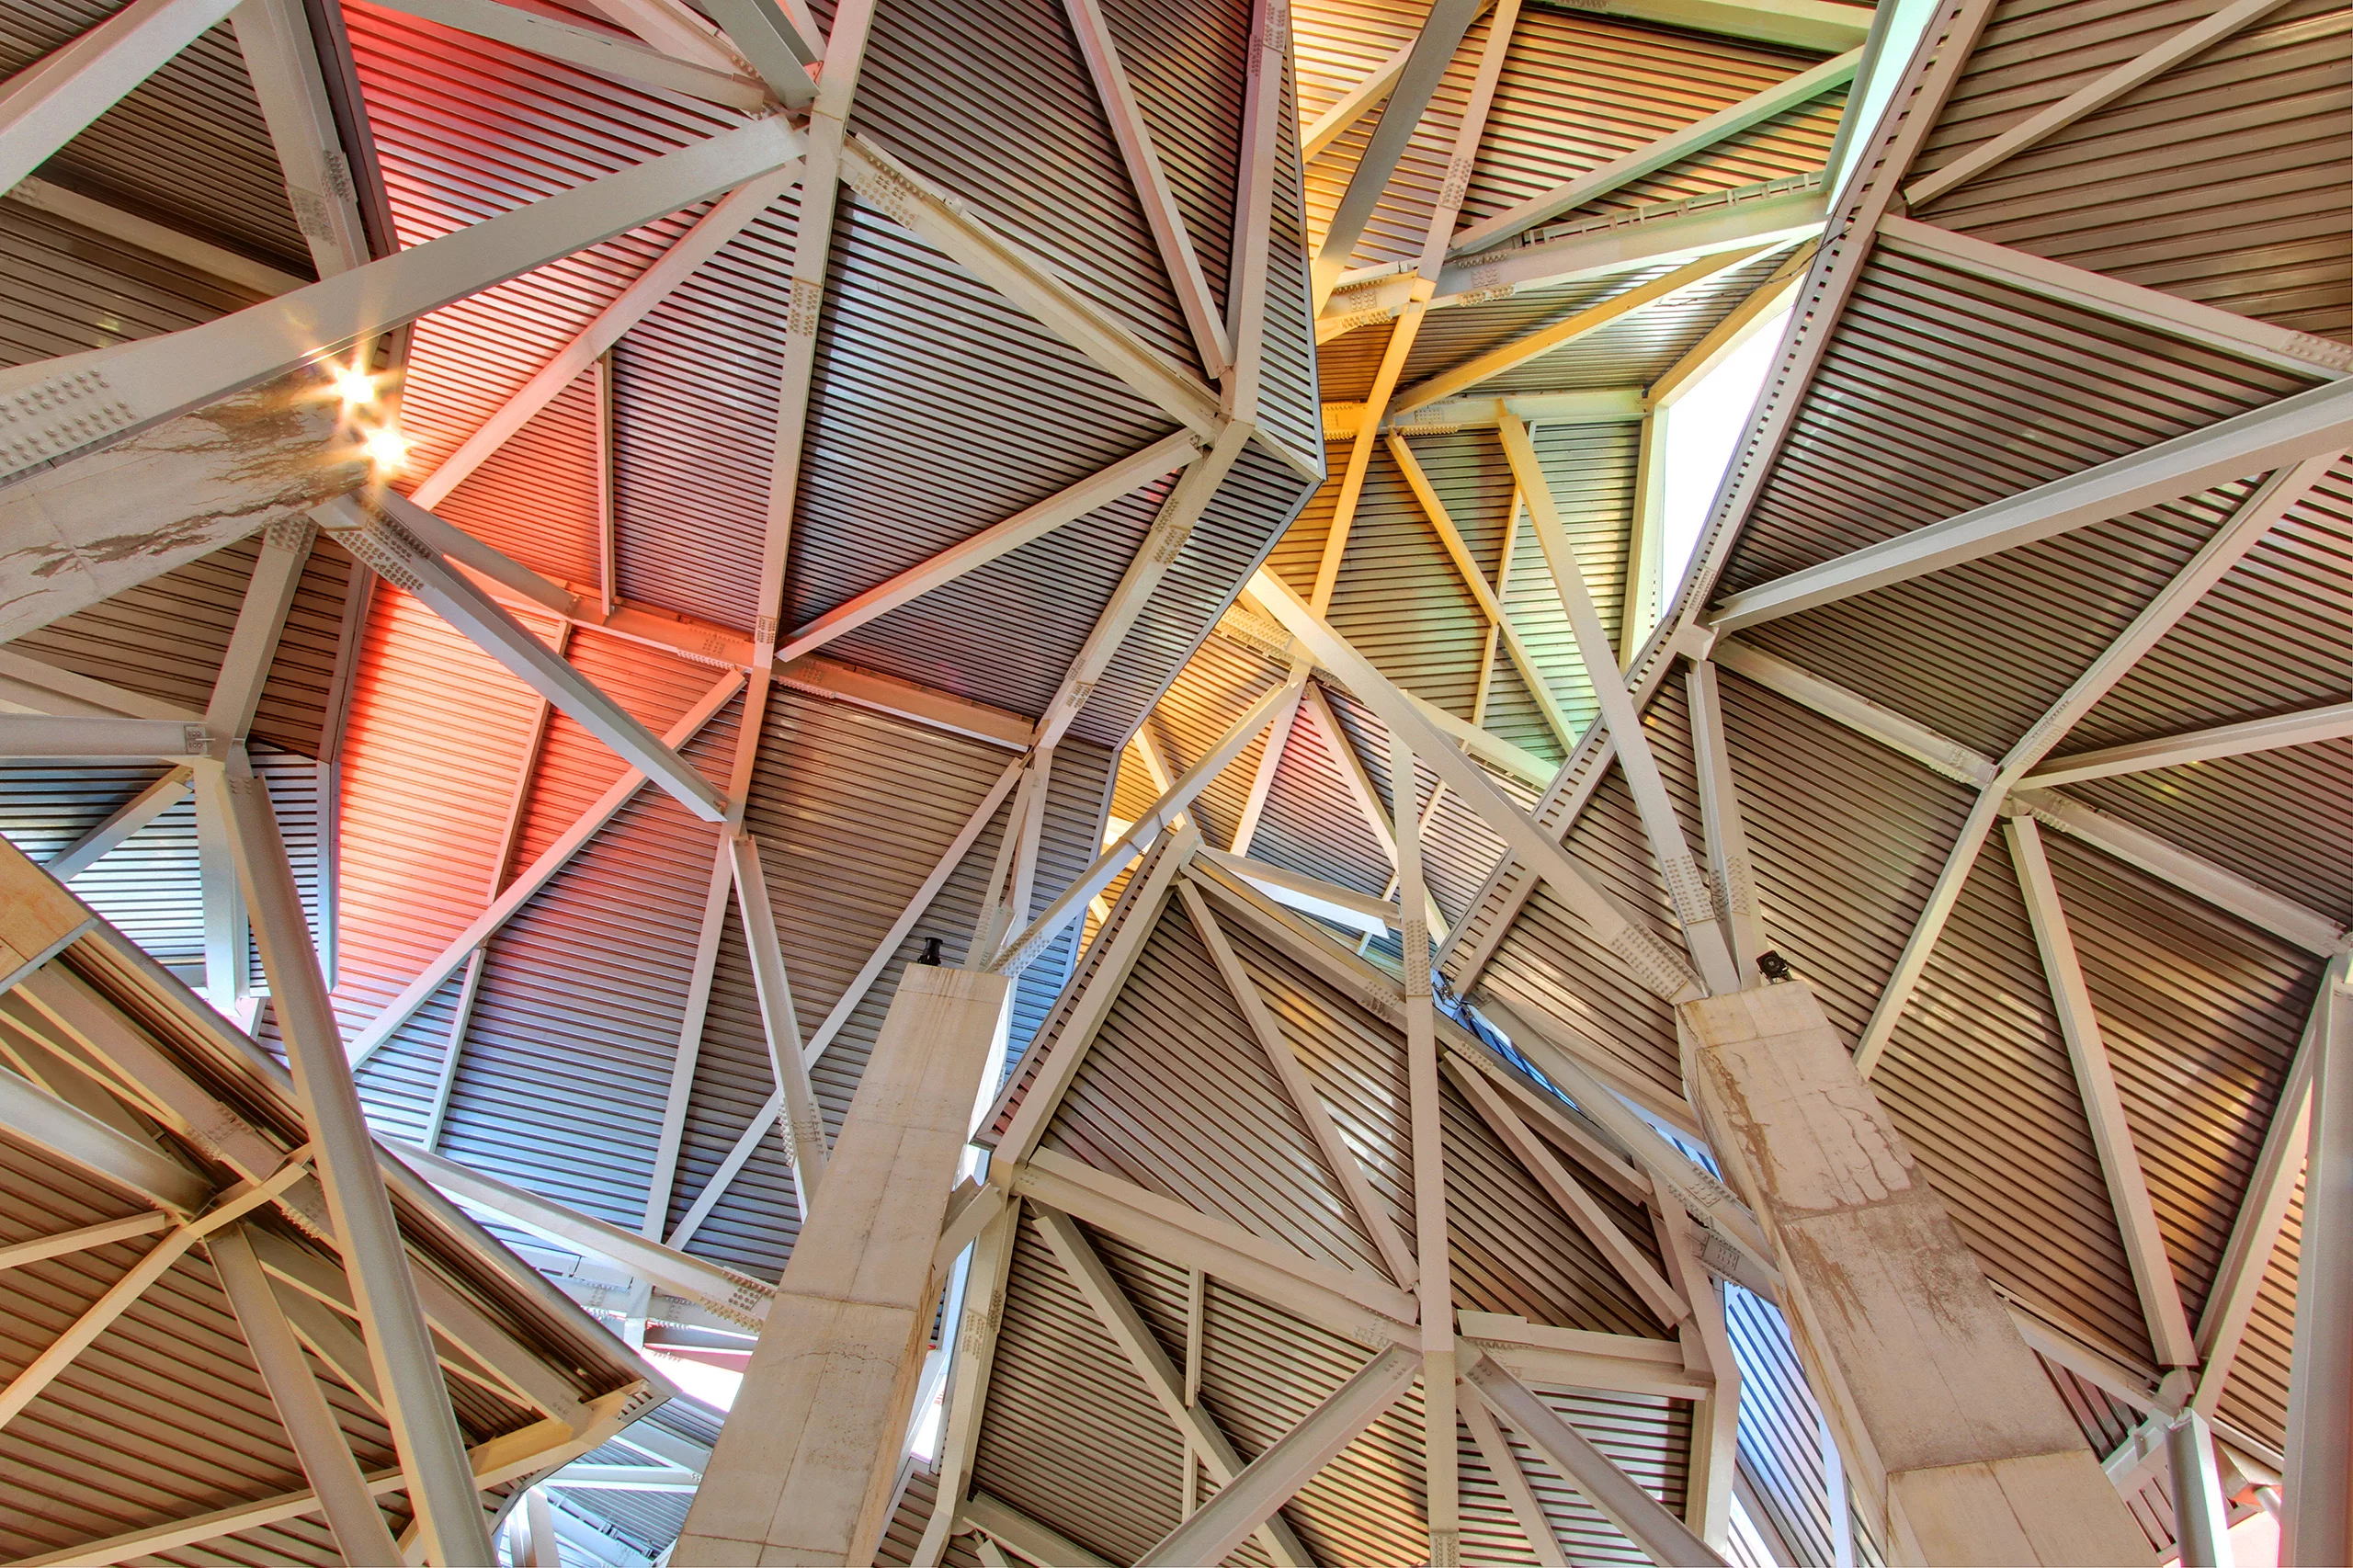 Looking up toward the intricate roof structure above the lobby at the Panama Museum of Biodiversity